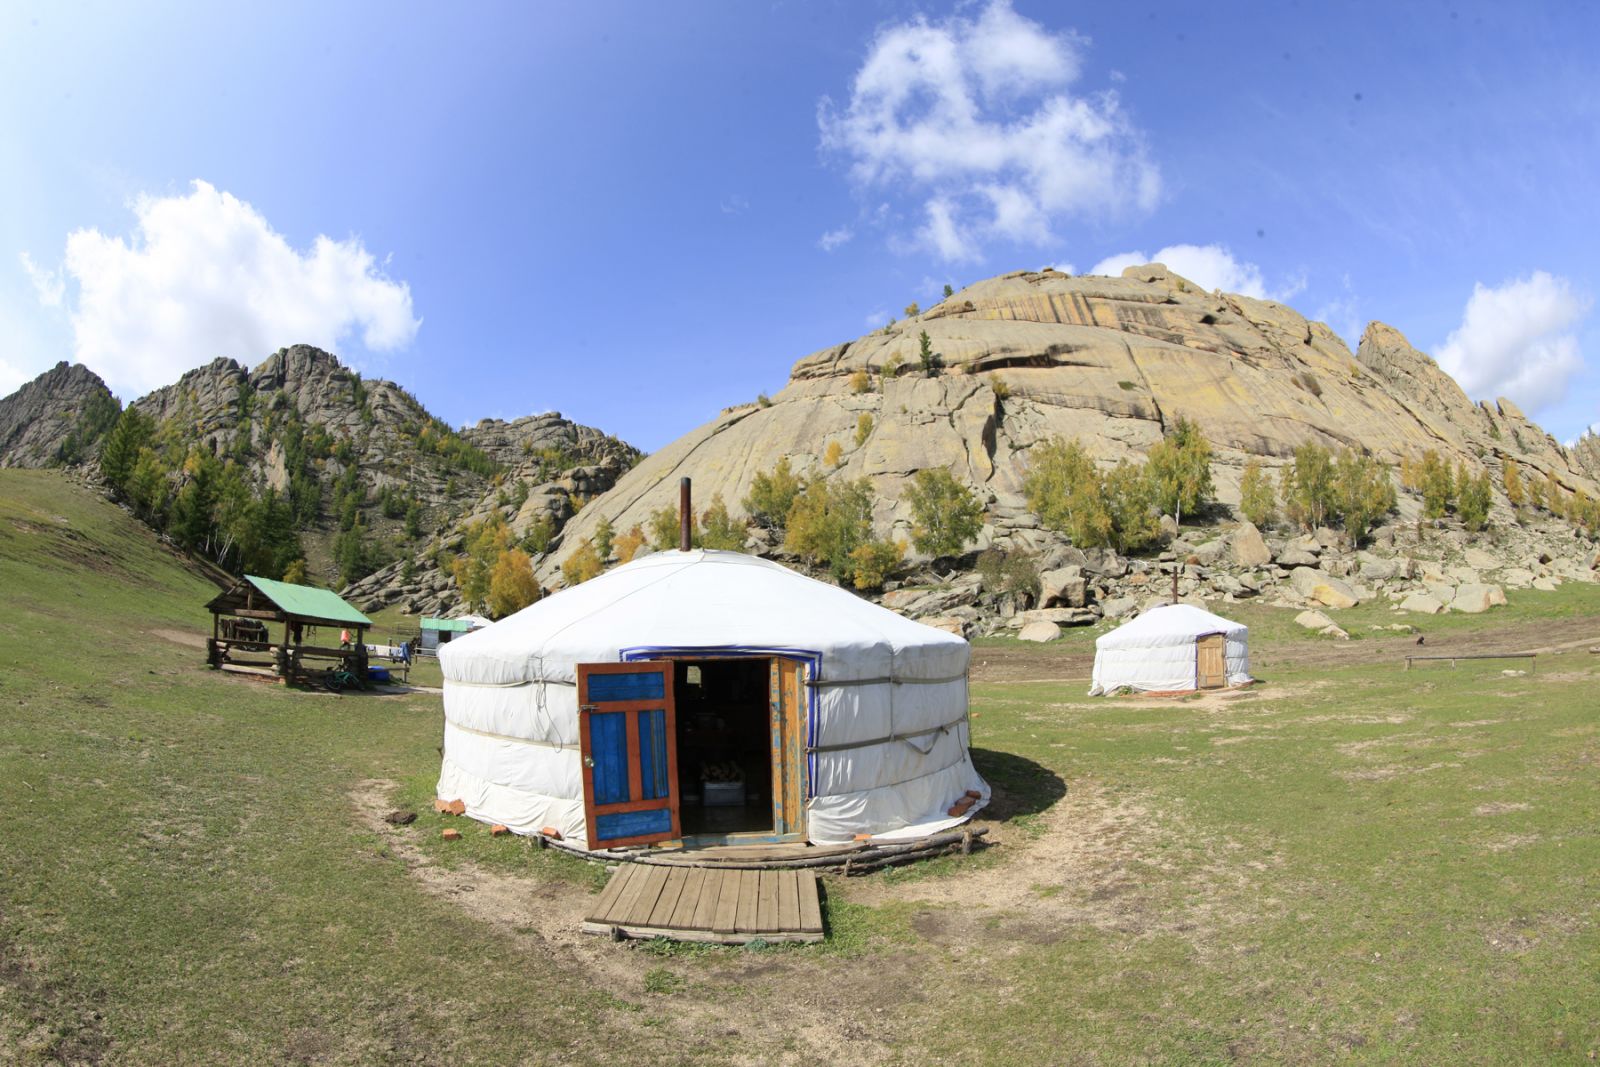 Embark on an Epic Journey: Explore Mongolia with our New Tours!